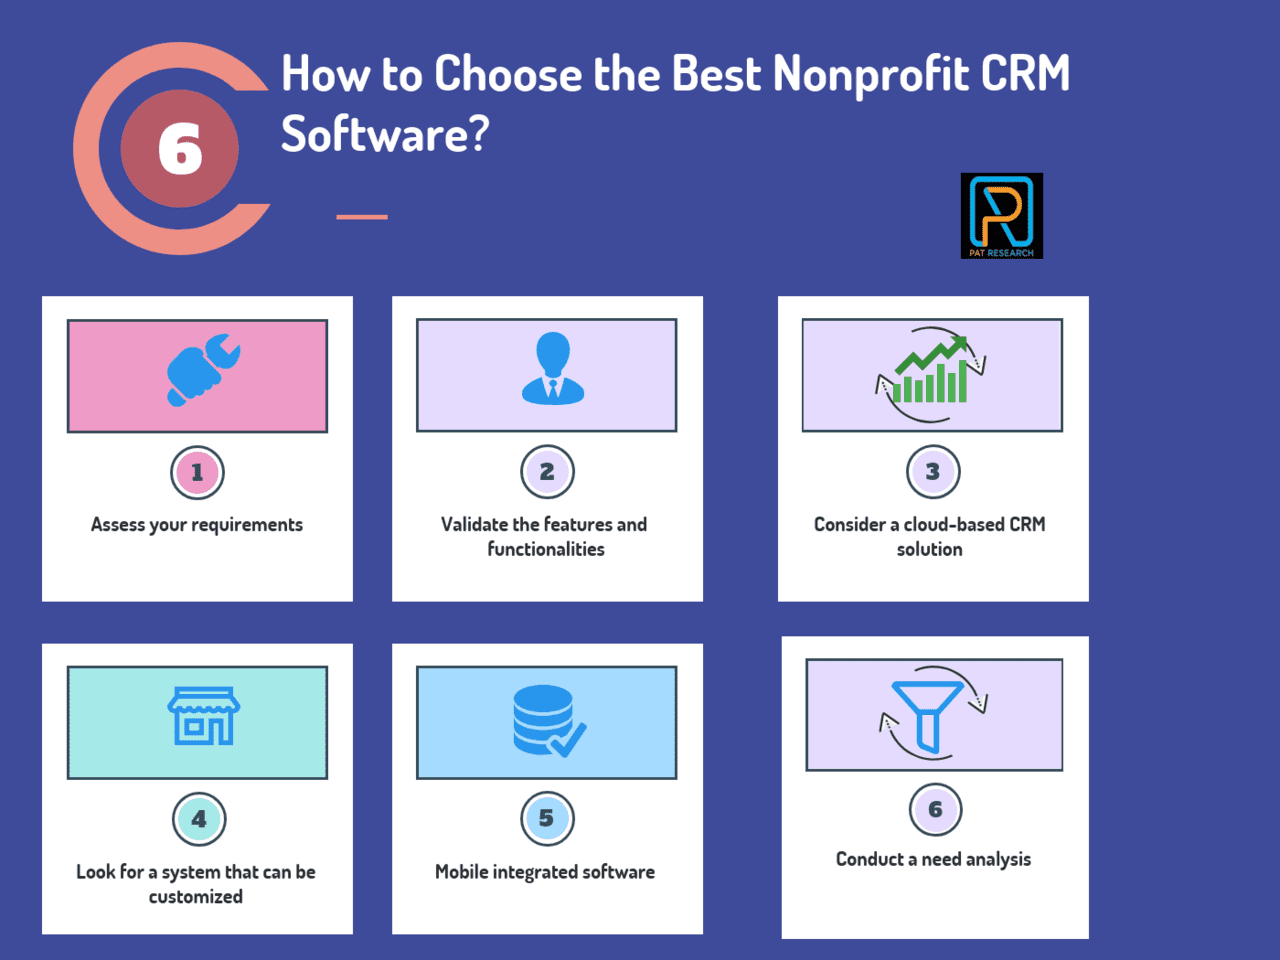 How to Choose the Best Nonprofit CRM Software